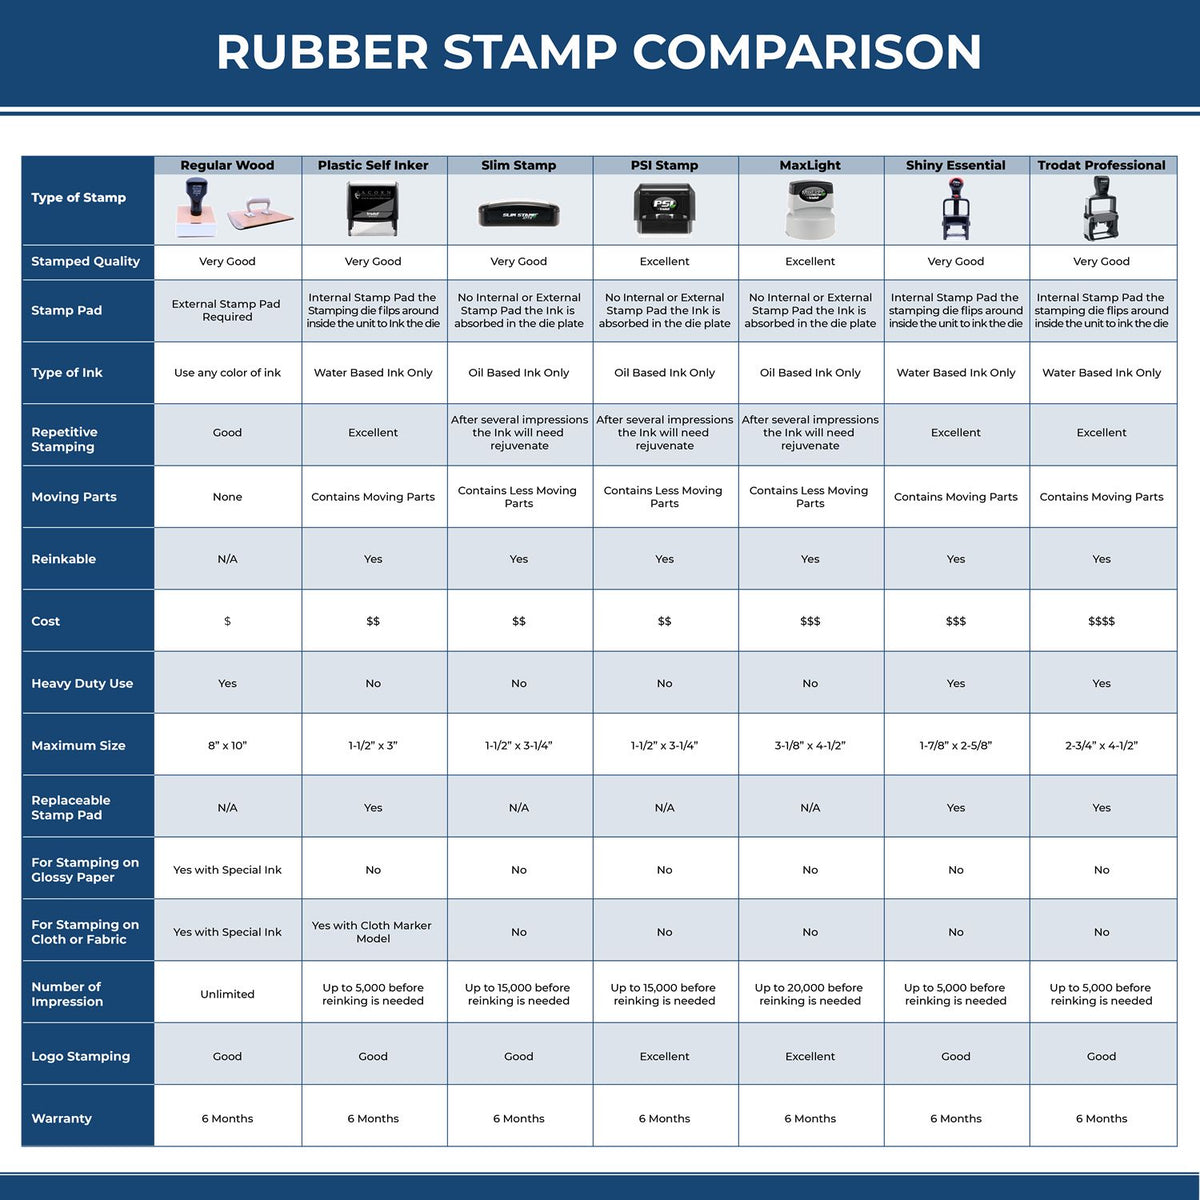 A comparison chart for the different types of mount models available for the District of Columbia Professional Engineer Seal Stamp.